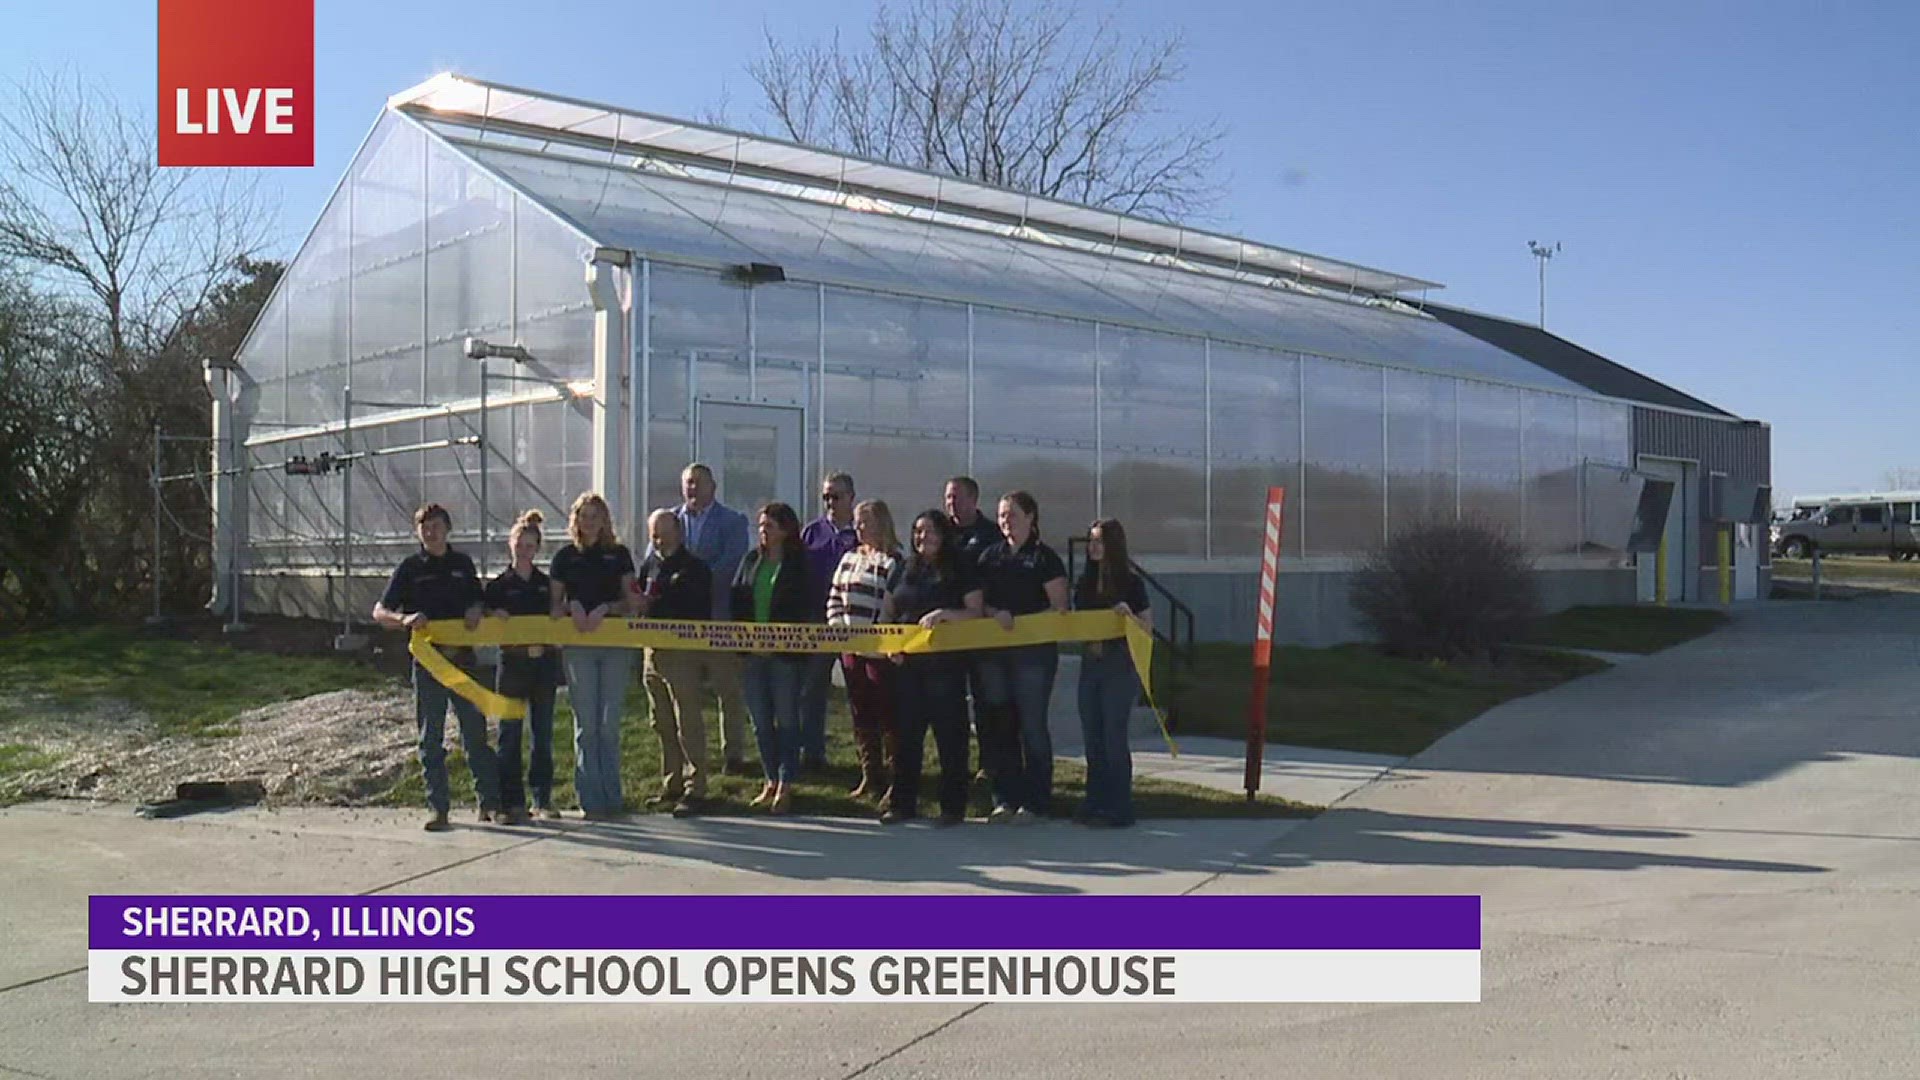 The greenhouse is bigger than the previous one, and has new heated floors, a roof vent and a high-intensity grow light system. The facility cost $625,000.